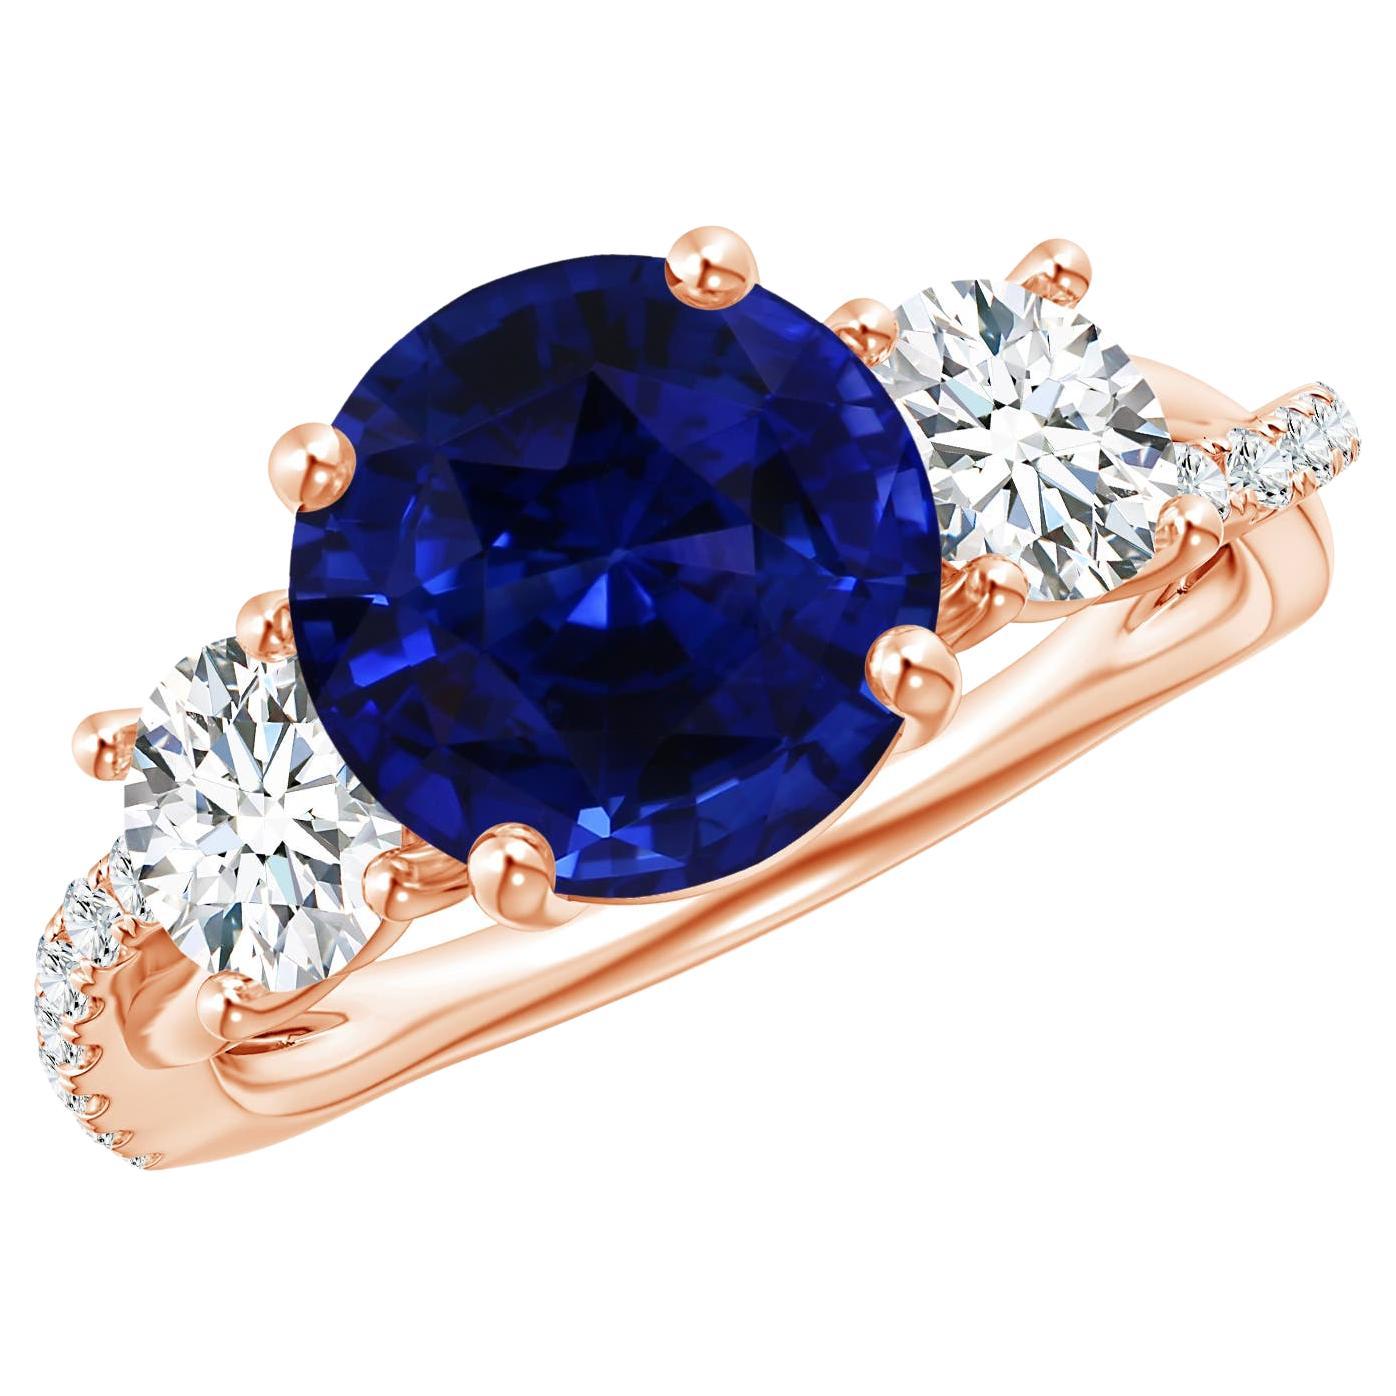 For Sale:  GIA Certified Natural Blue Sapphire Ring in Rose Gold with Diamonds